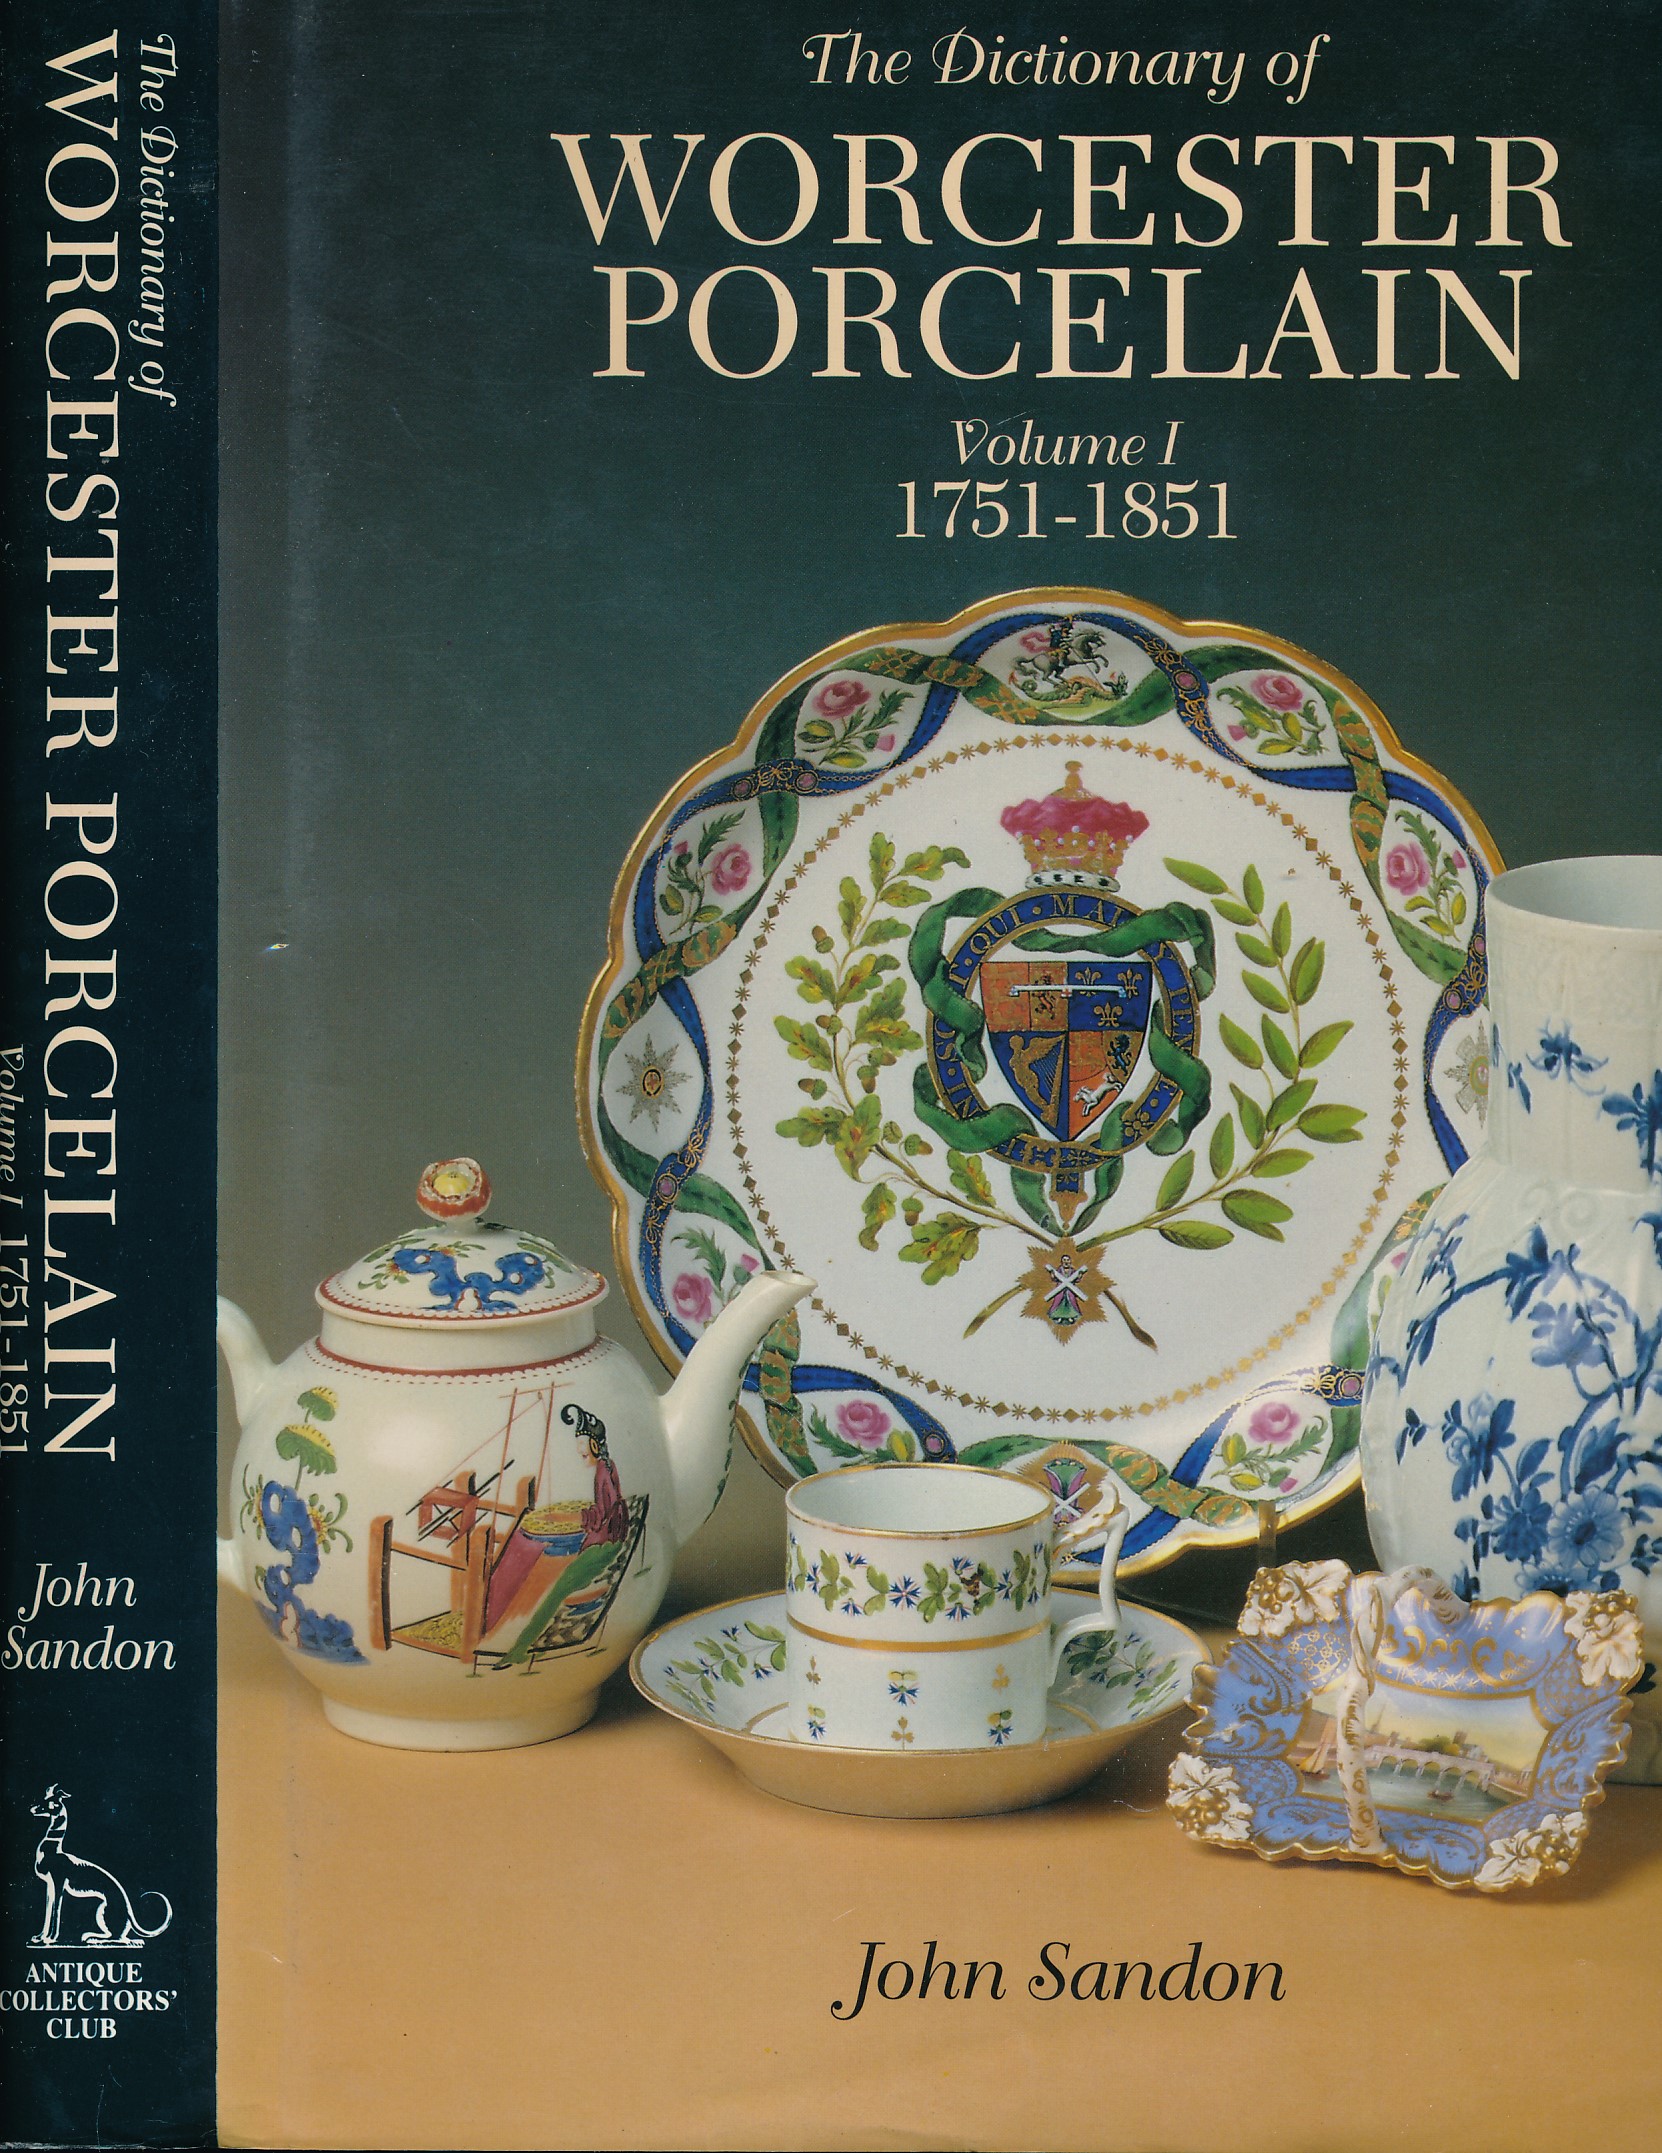 The Dictionary of Worcester Porcelain. Volume I. 1751 - 1851.